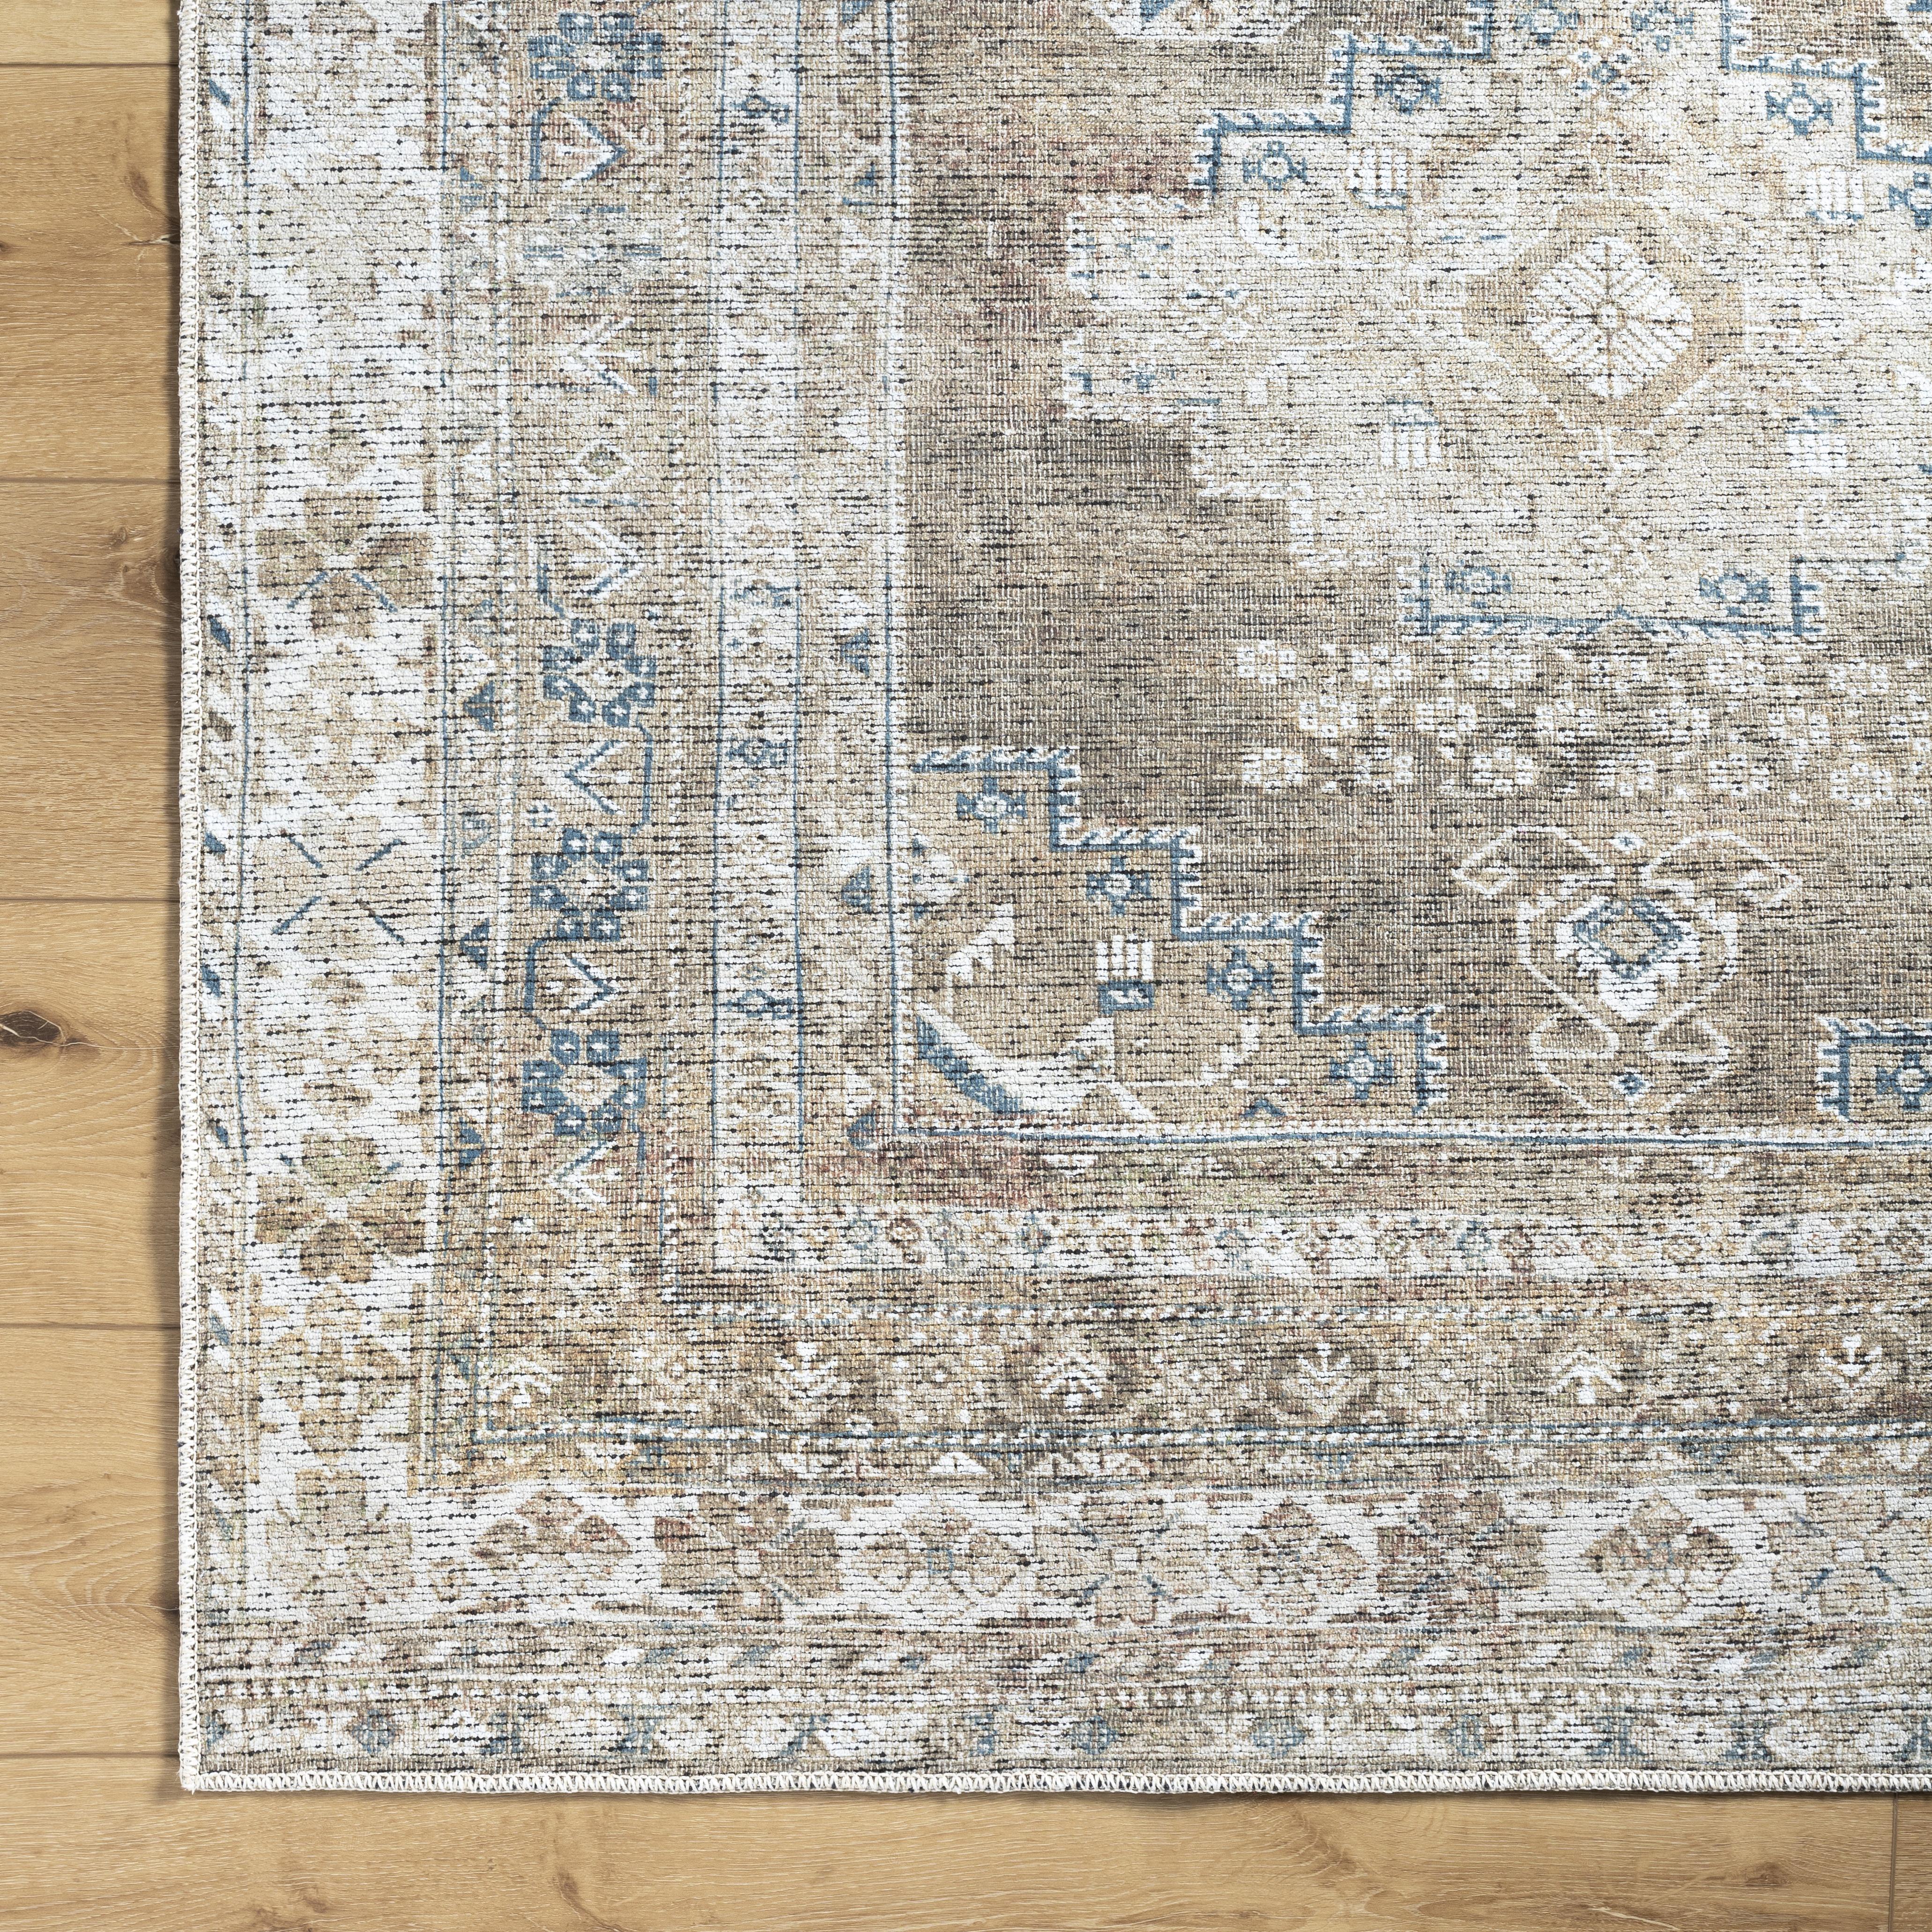 Better Homes & Gardens Geo Medallion Washable Non-Skid Area Rug, Sage, 5'3" x 7' - image 3 of 6